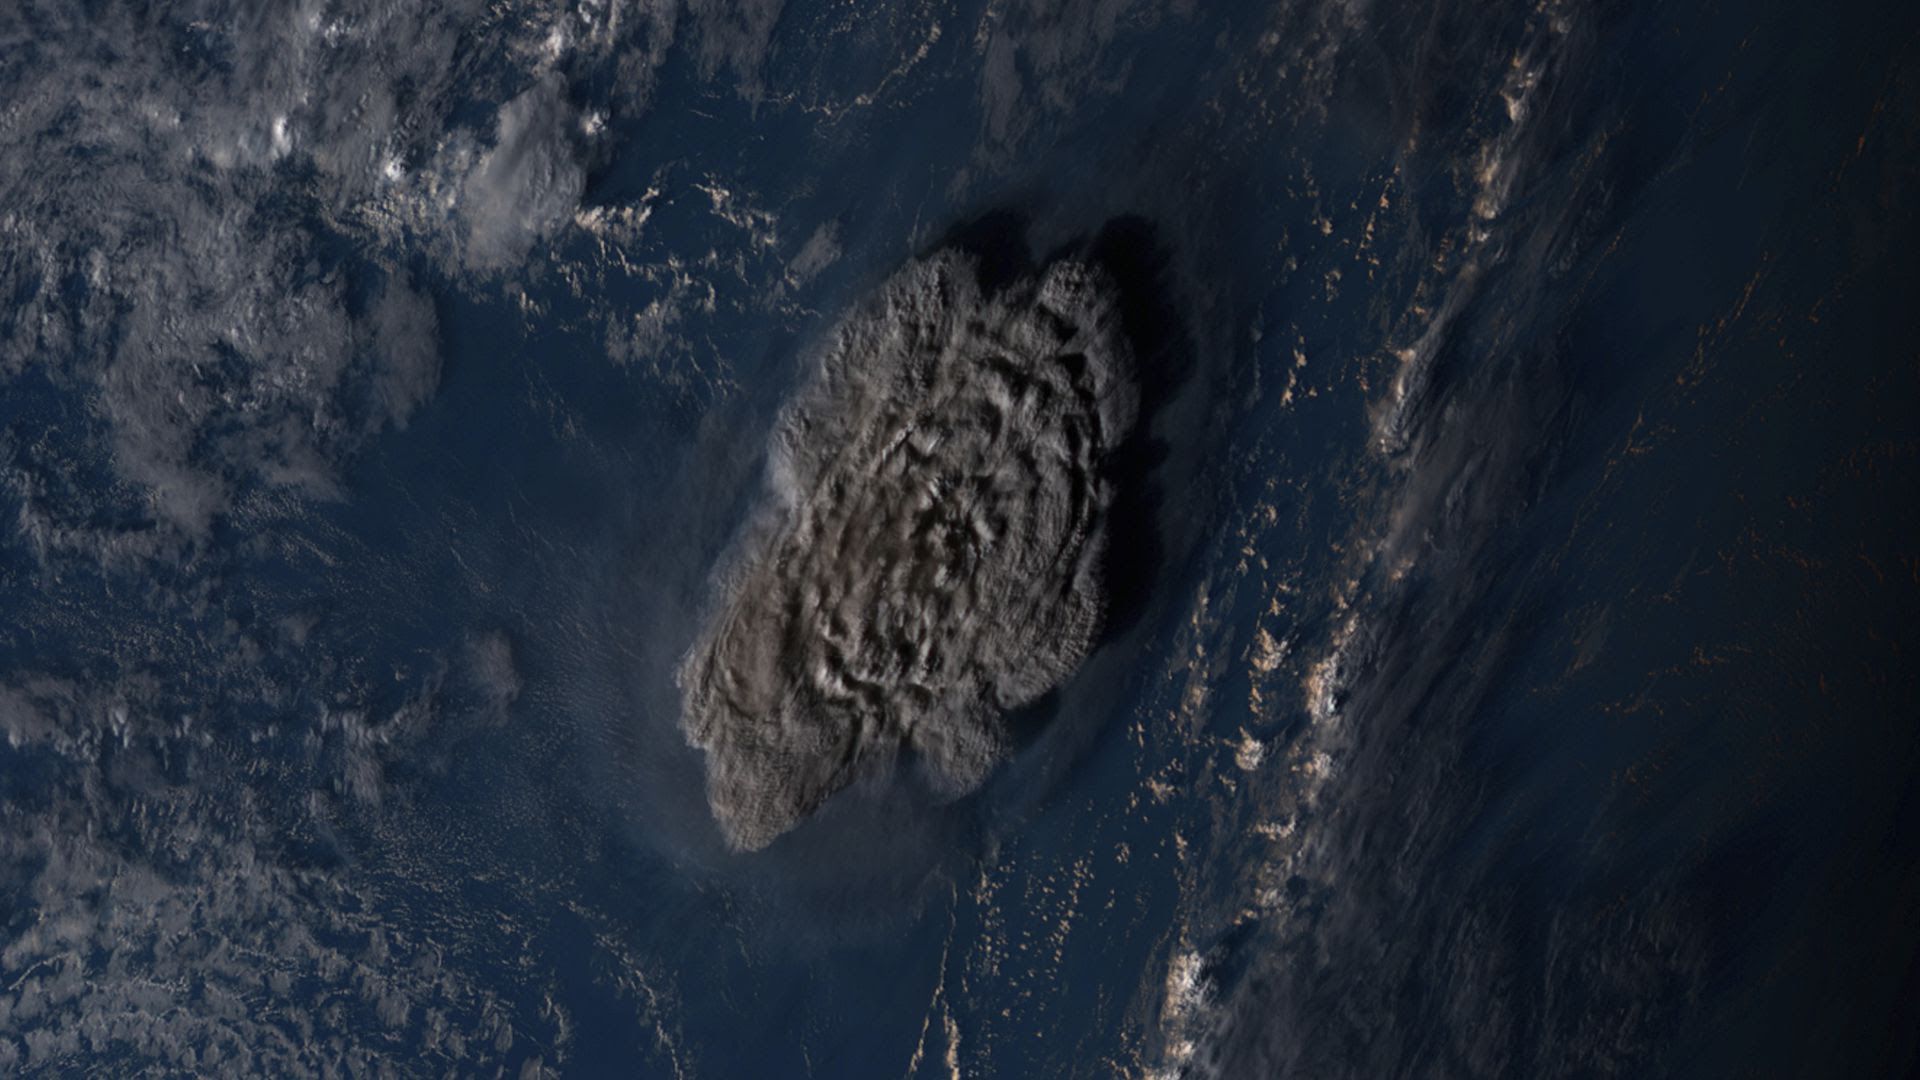 Himawari-8 satellite image, released by the National Institute of Information and Communications Technology shows the Tonga undersea volcano eruption Saturday, Jan. 15, 2022. (NICT via AP)